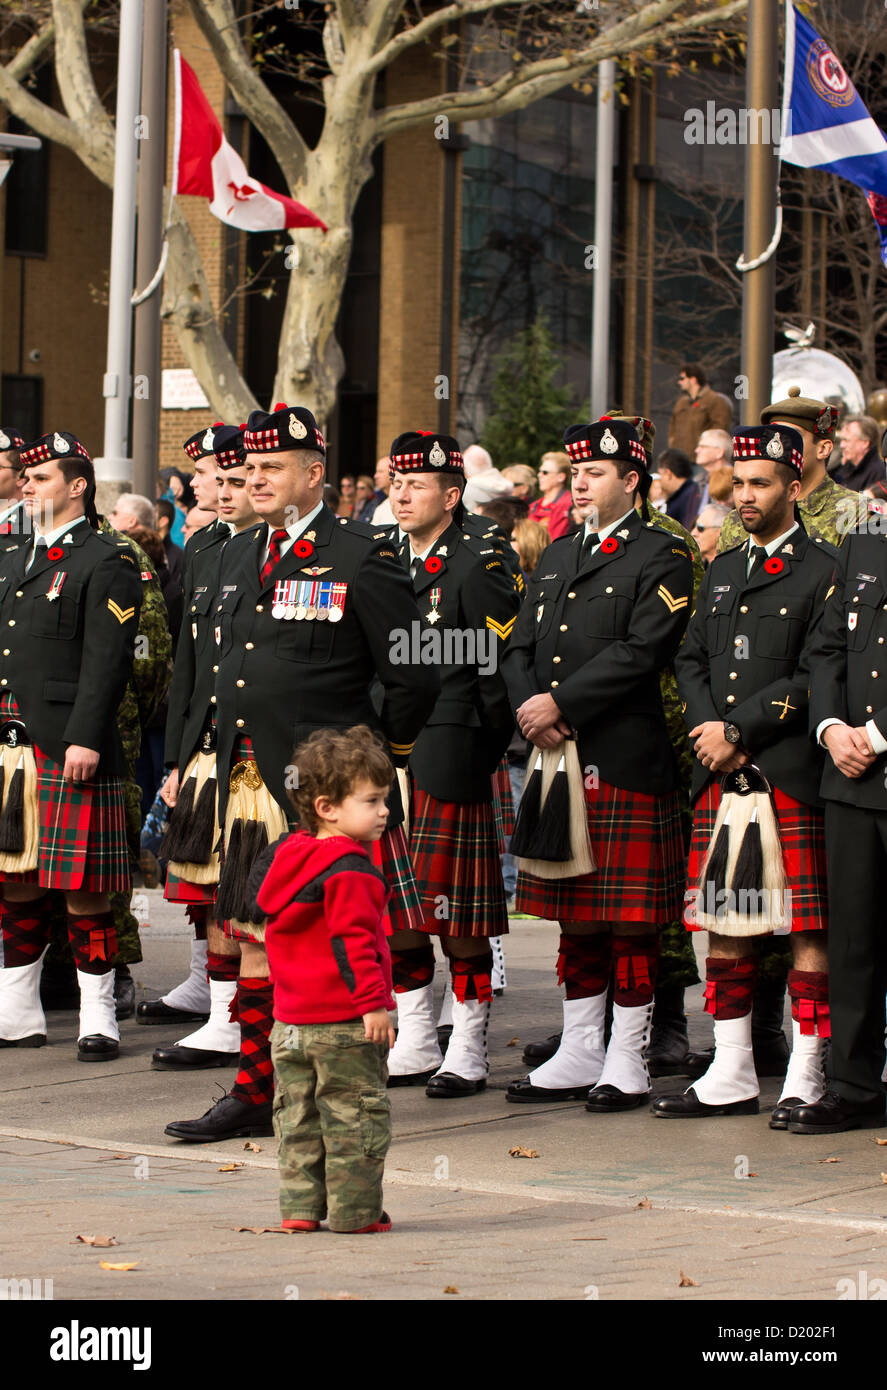 A child stands infront of uniformed soldiers at a Remembrance Day ceremony in Windsor, Ontario, Canada. Stock Photo